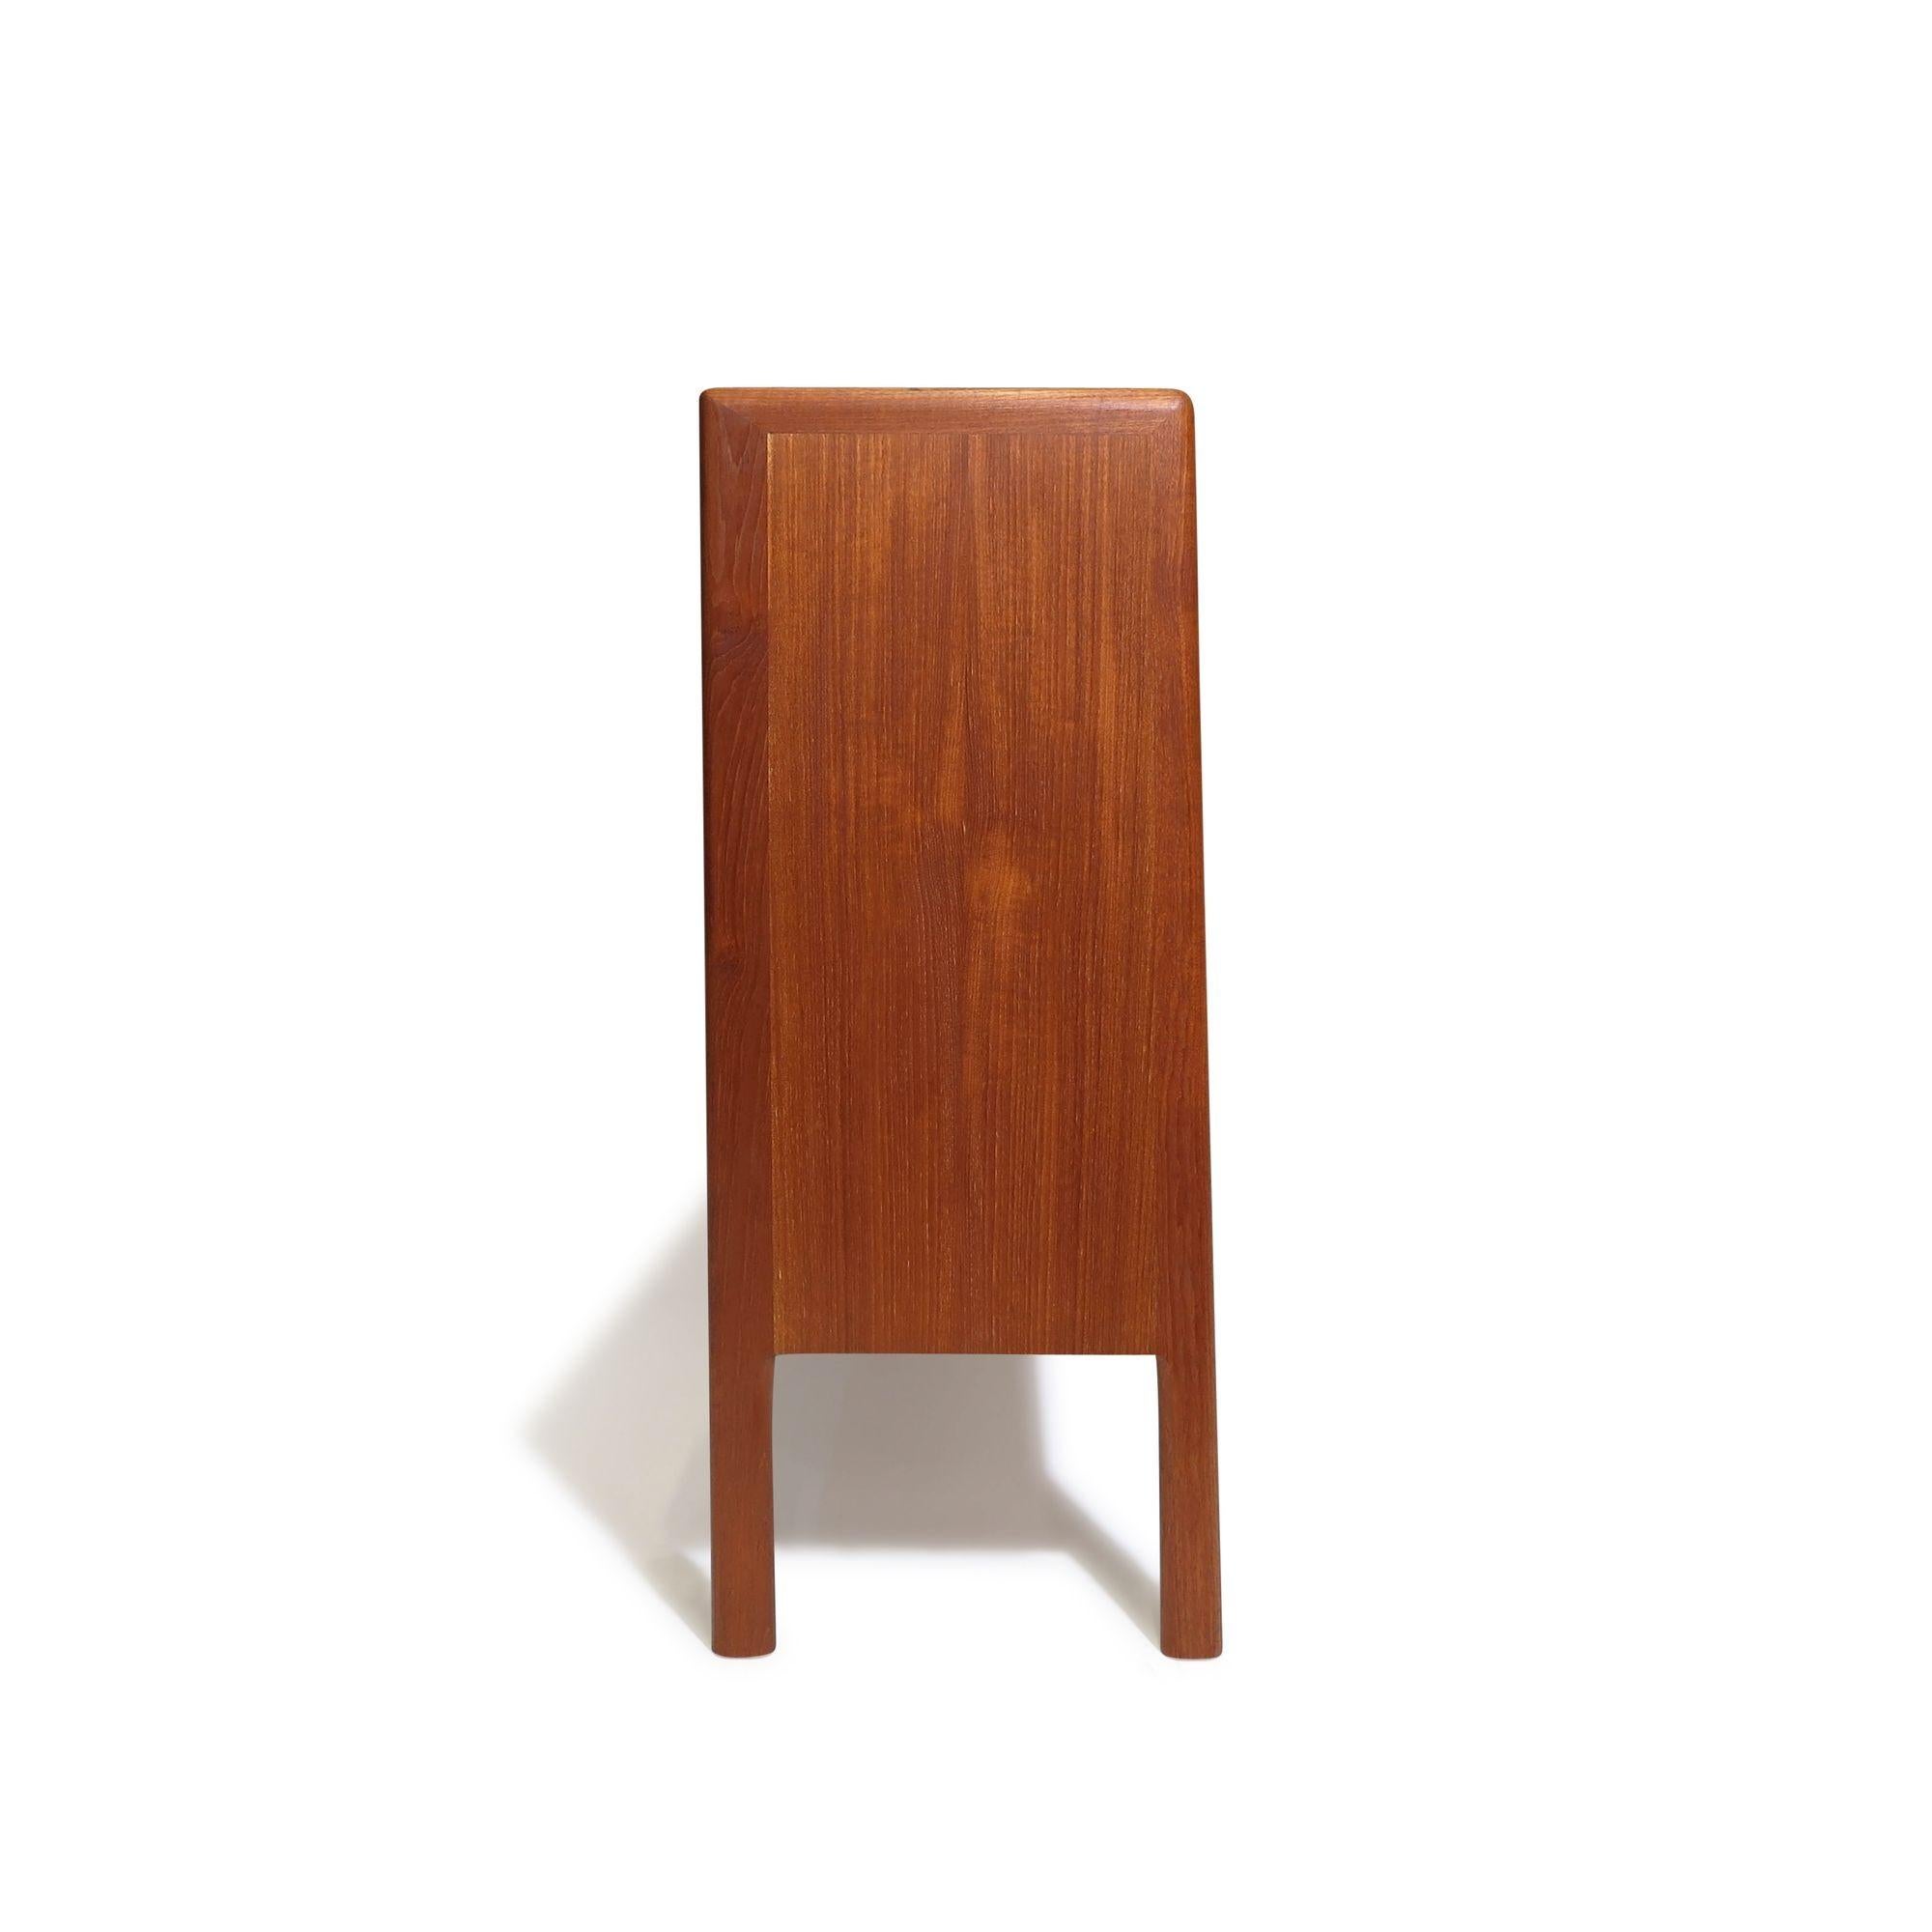 Designed by Hans Wegner, this Mid-century Danish teak cabinet features a front pair of sliding glass doors that open to reveal an interior of teak with adjustable shelves. Fully restored with a natural oil finish, the credenza highlights the rich